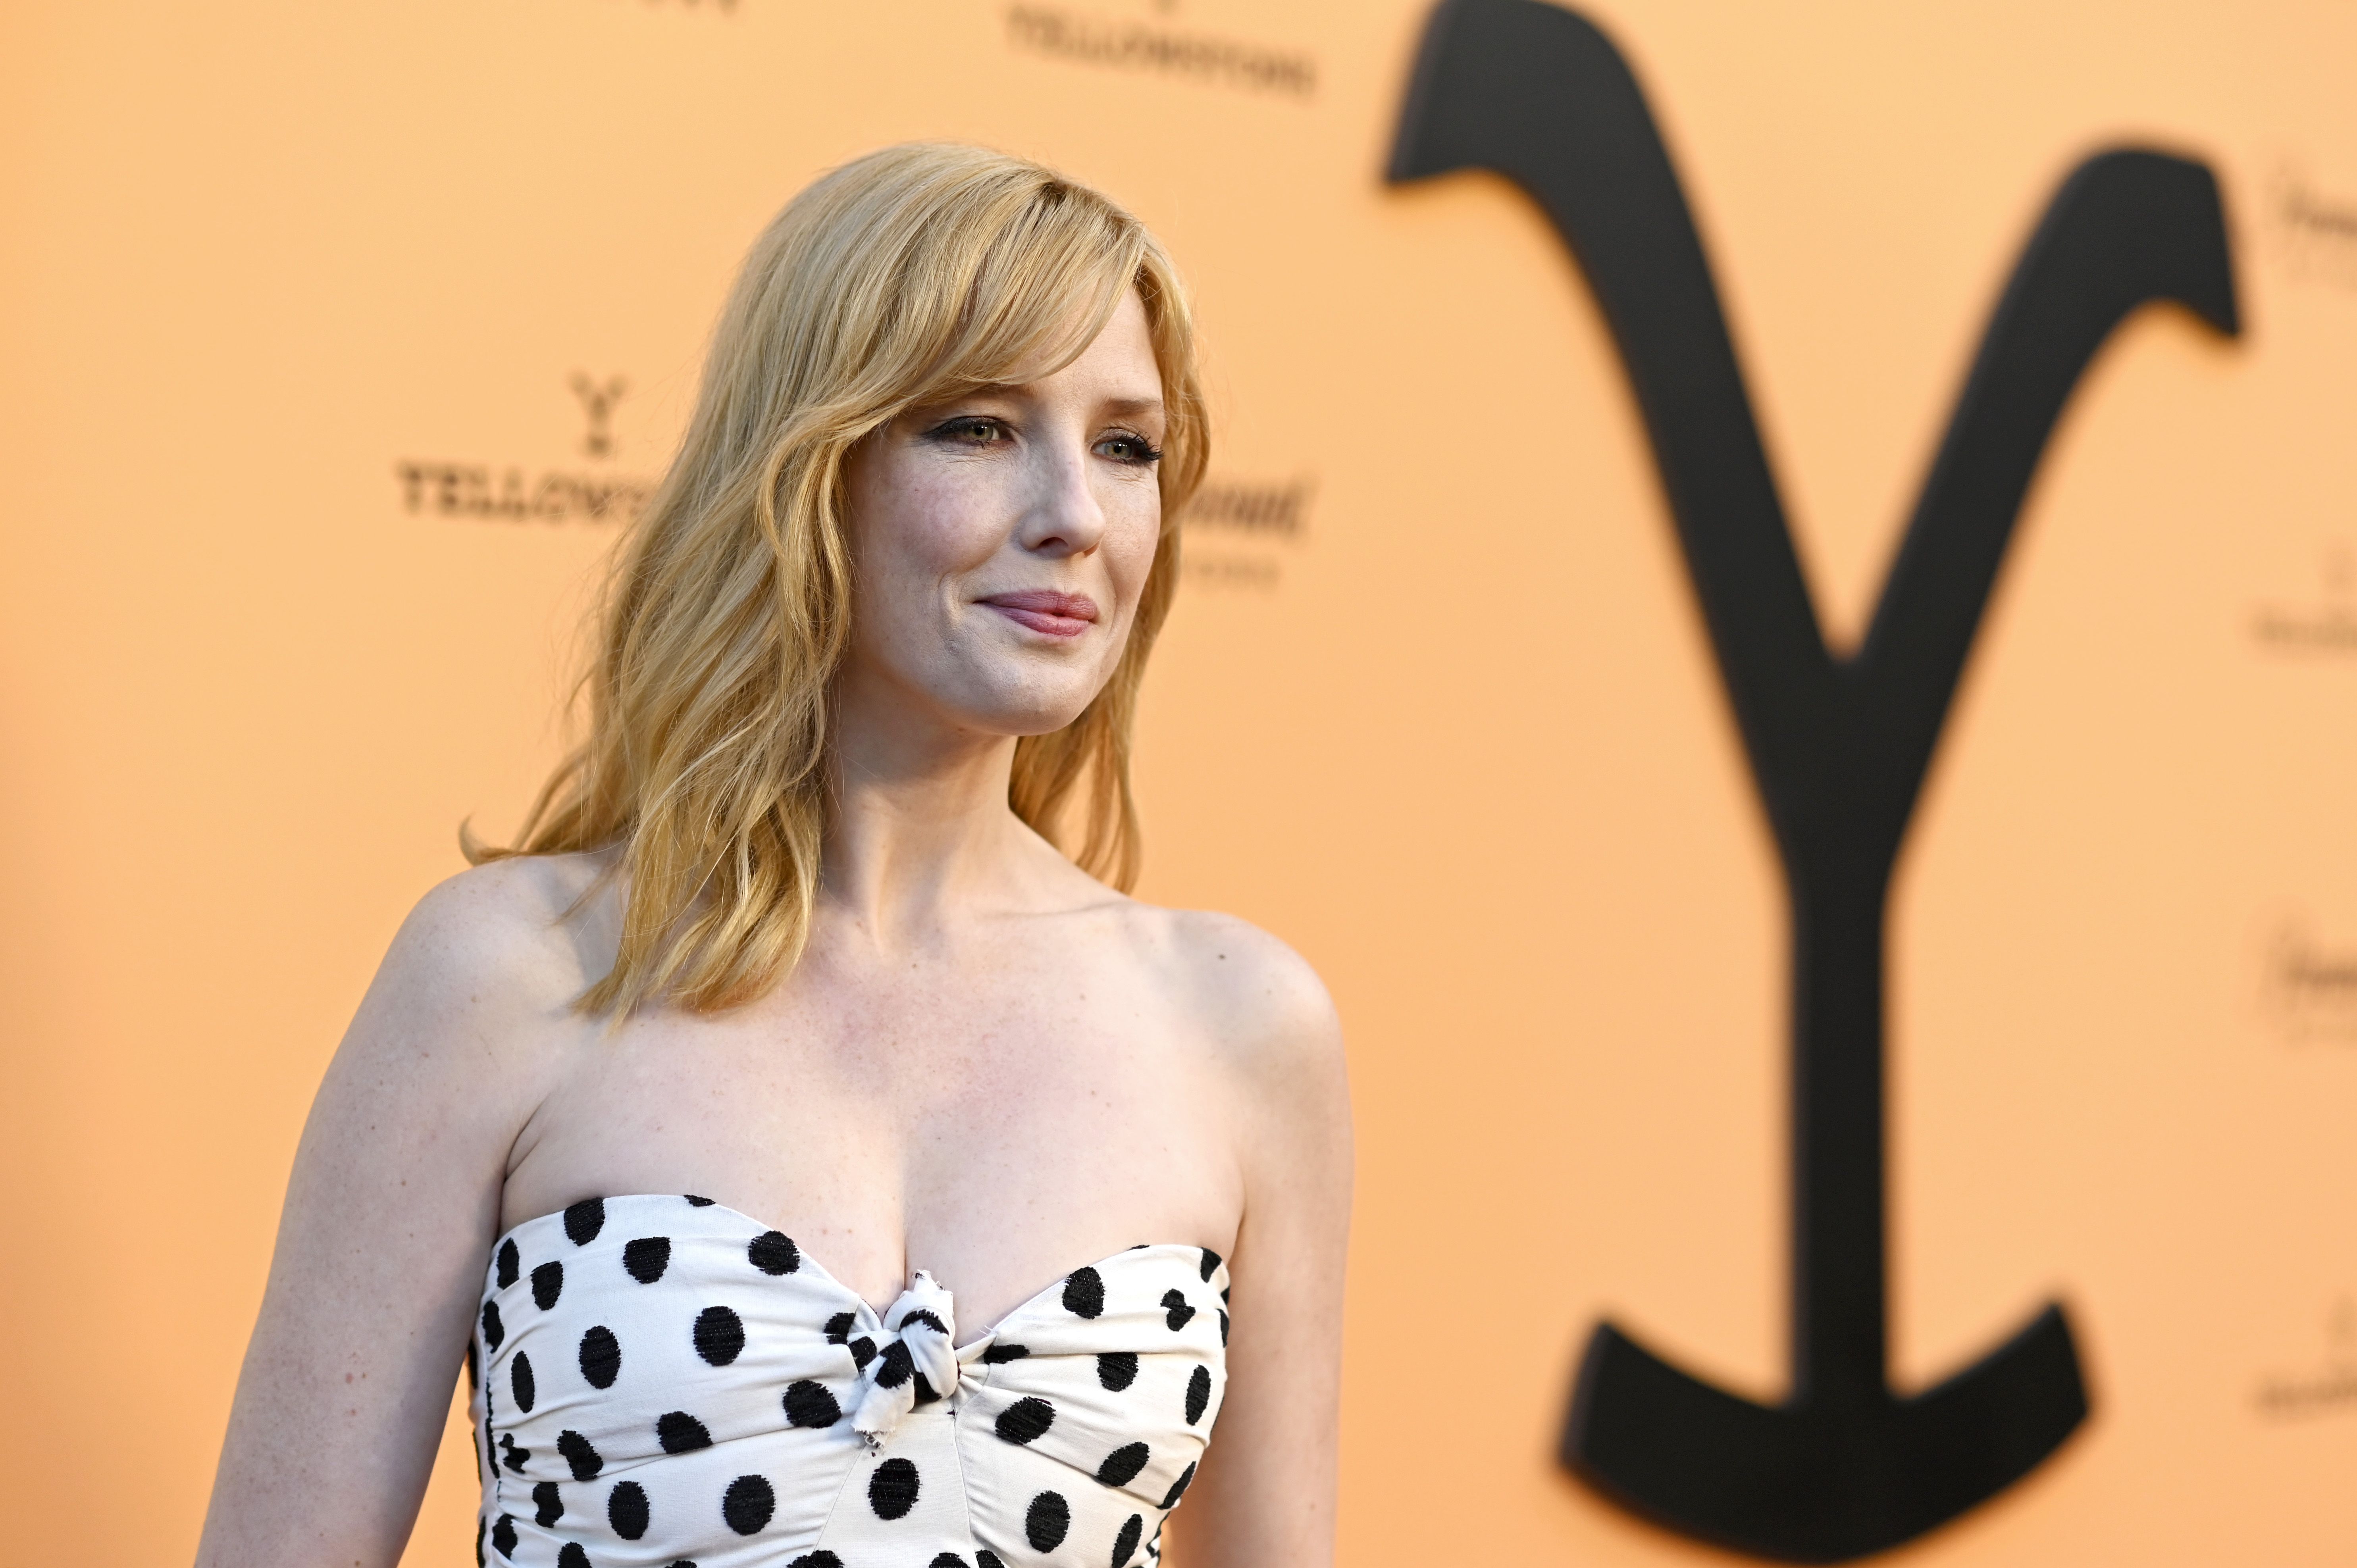 Kelly Reilly Pics